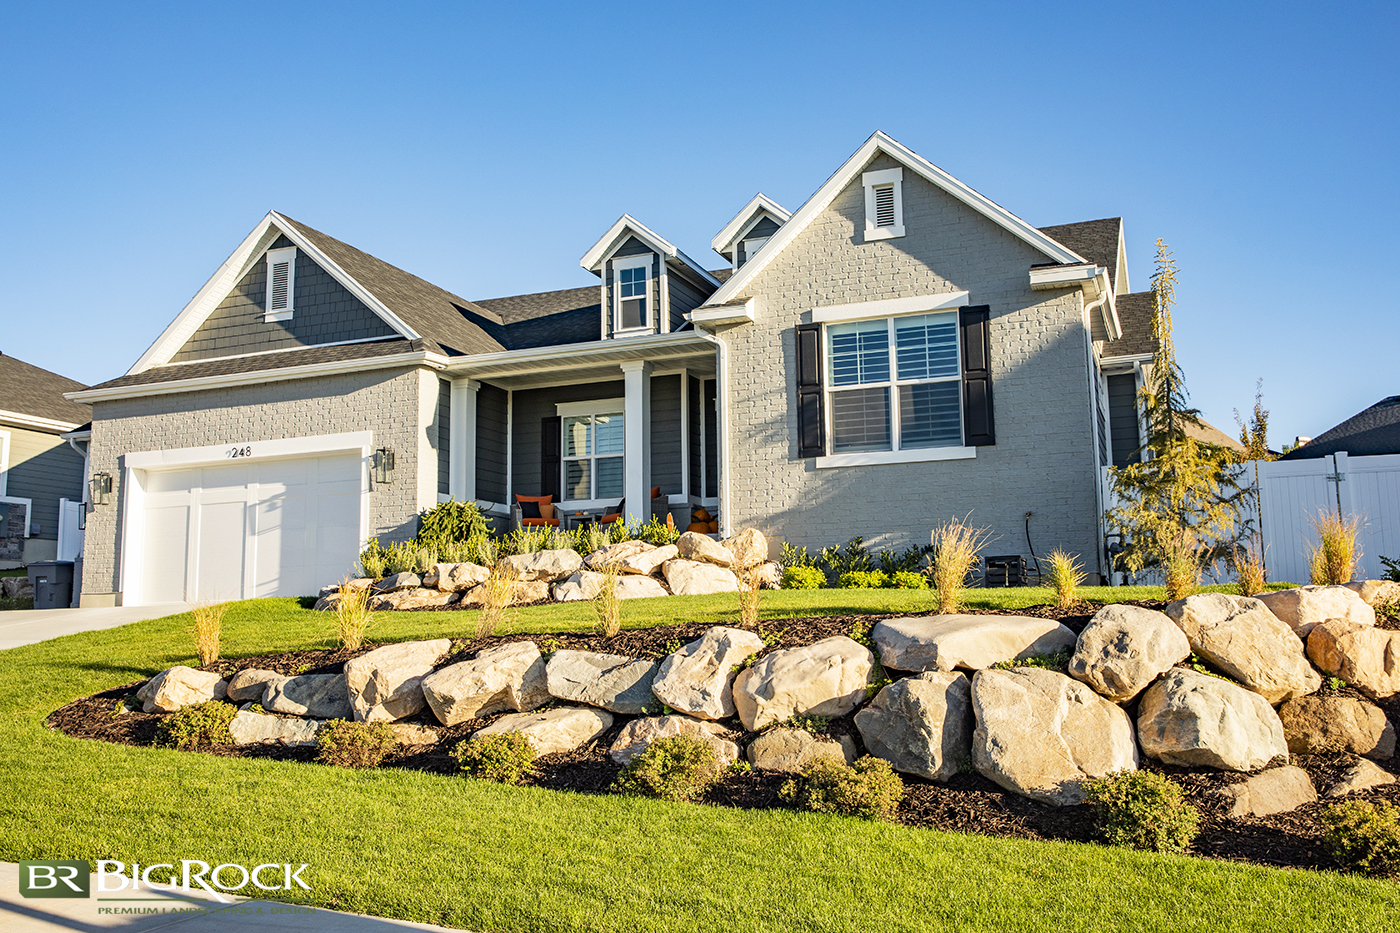 Find out what is involved with sod installation, and how to choose the best option for your space. Contact Big Rock Landscaping for assistance!